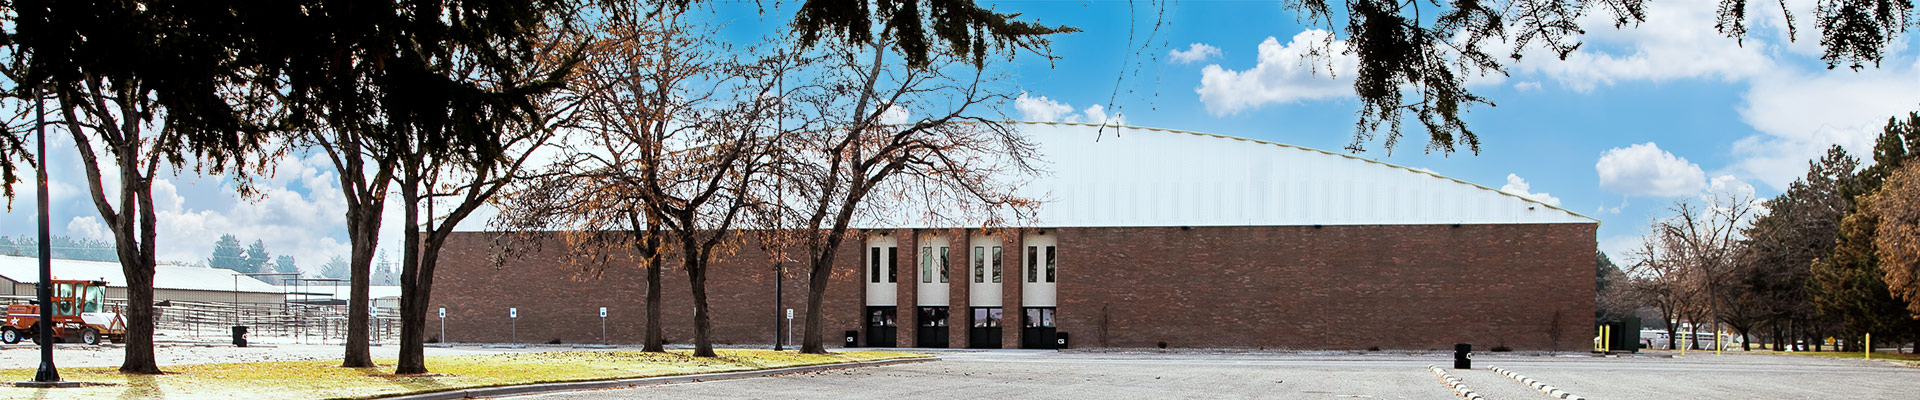 Large brick building with large parking lot outfront